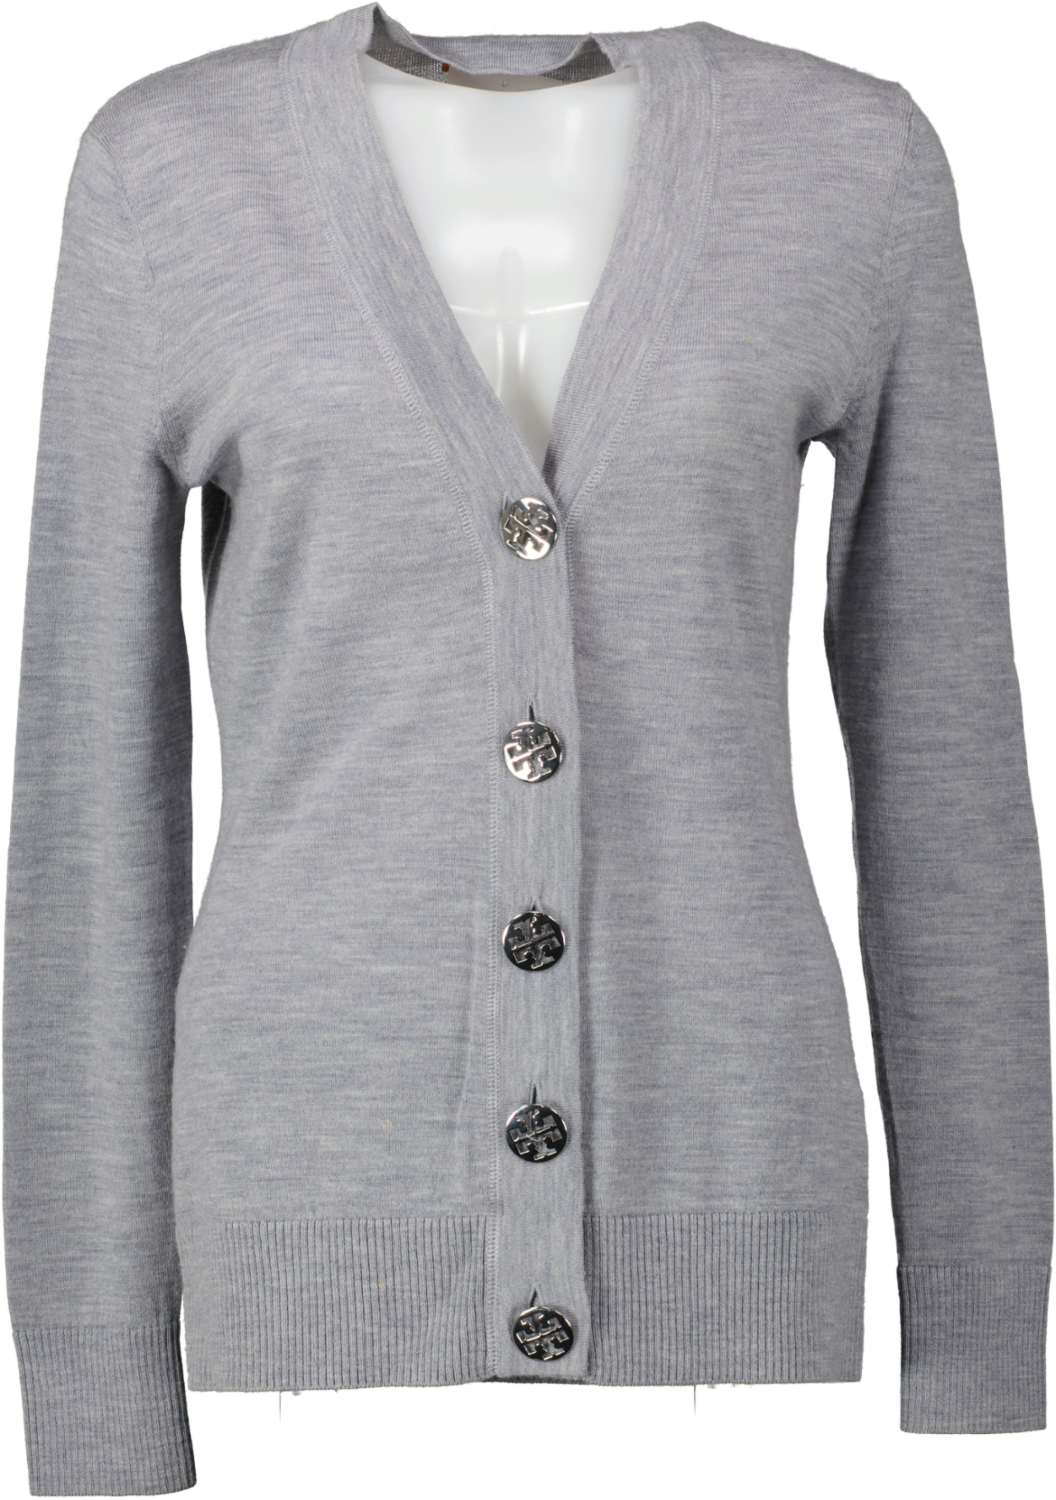 Tory Burch Grey Merino V-neck Cardigan With Silver Logo Buttons UK S